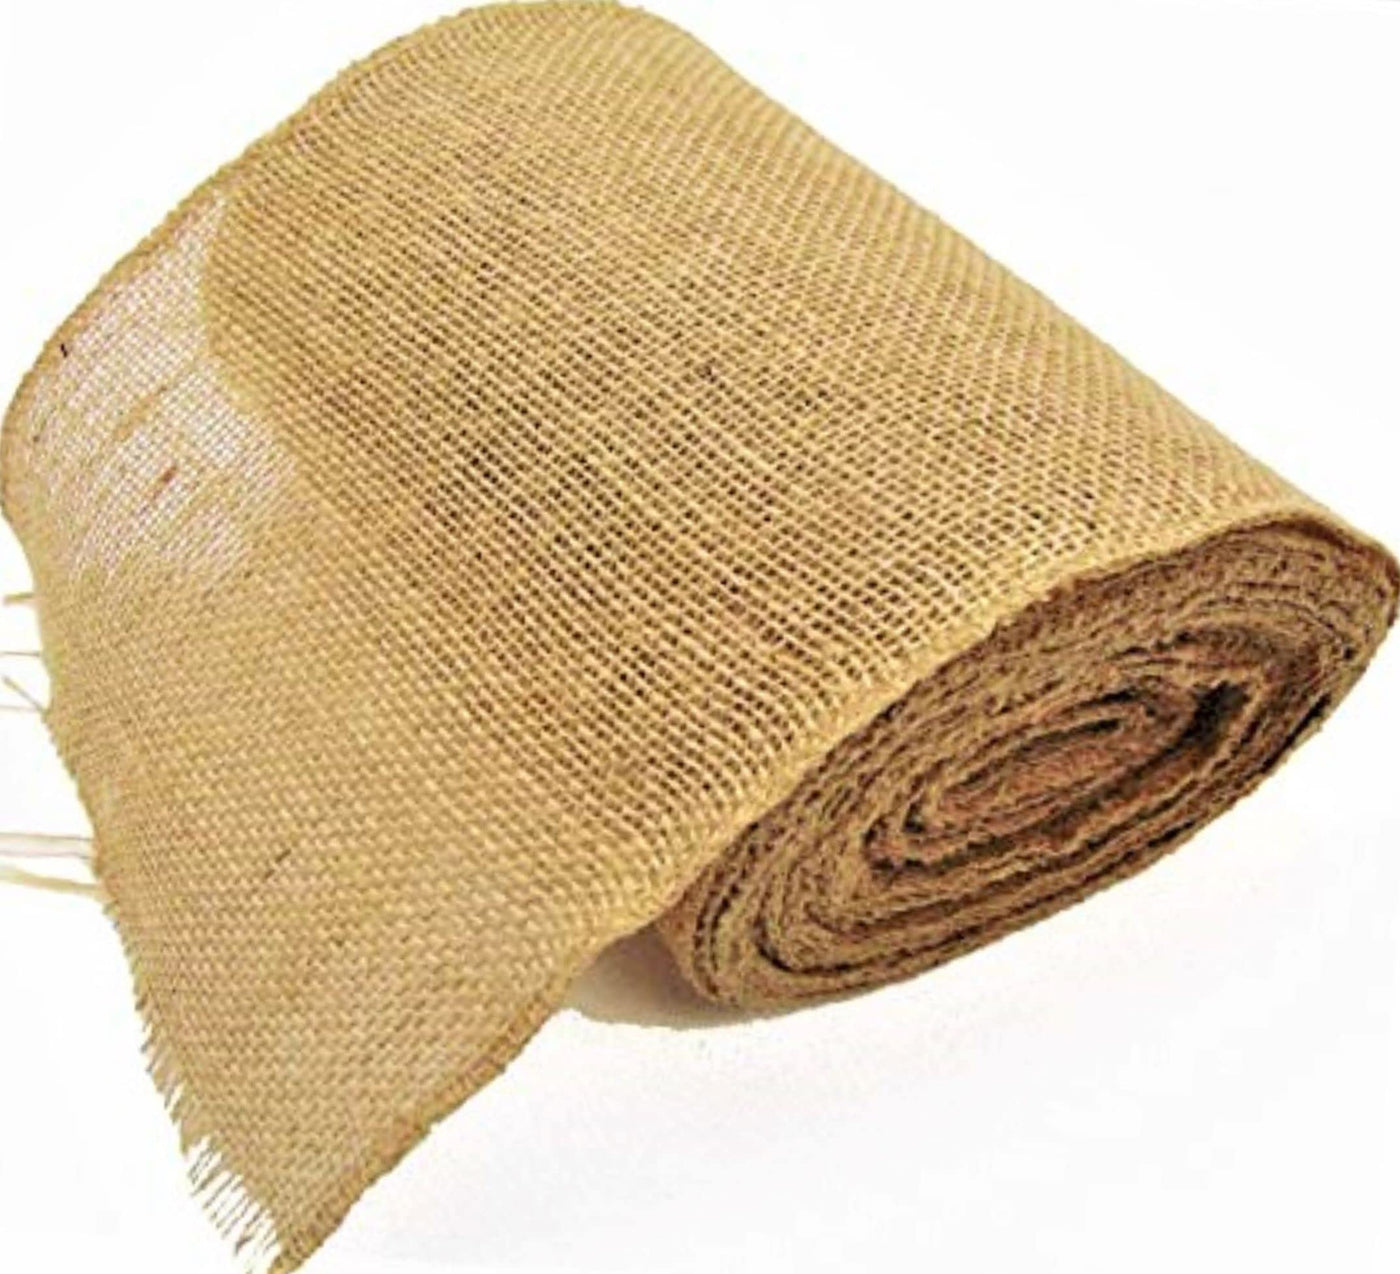 AAYU Natural Jute Wide Tight Weave Burlap Ribbon 6inch 30ft 10yards Eco Friendly, DIY Gift Wrapping, Weddings, Tie Backs Home Decor Crafts Christmas Decoration